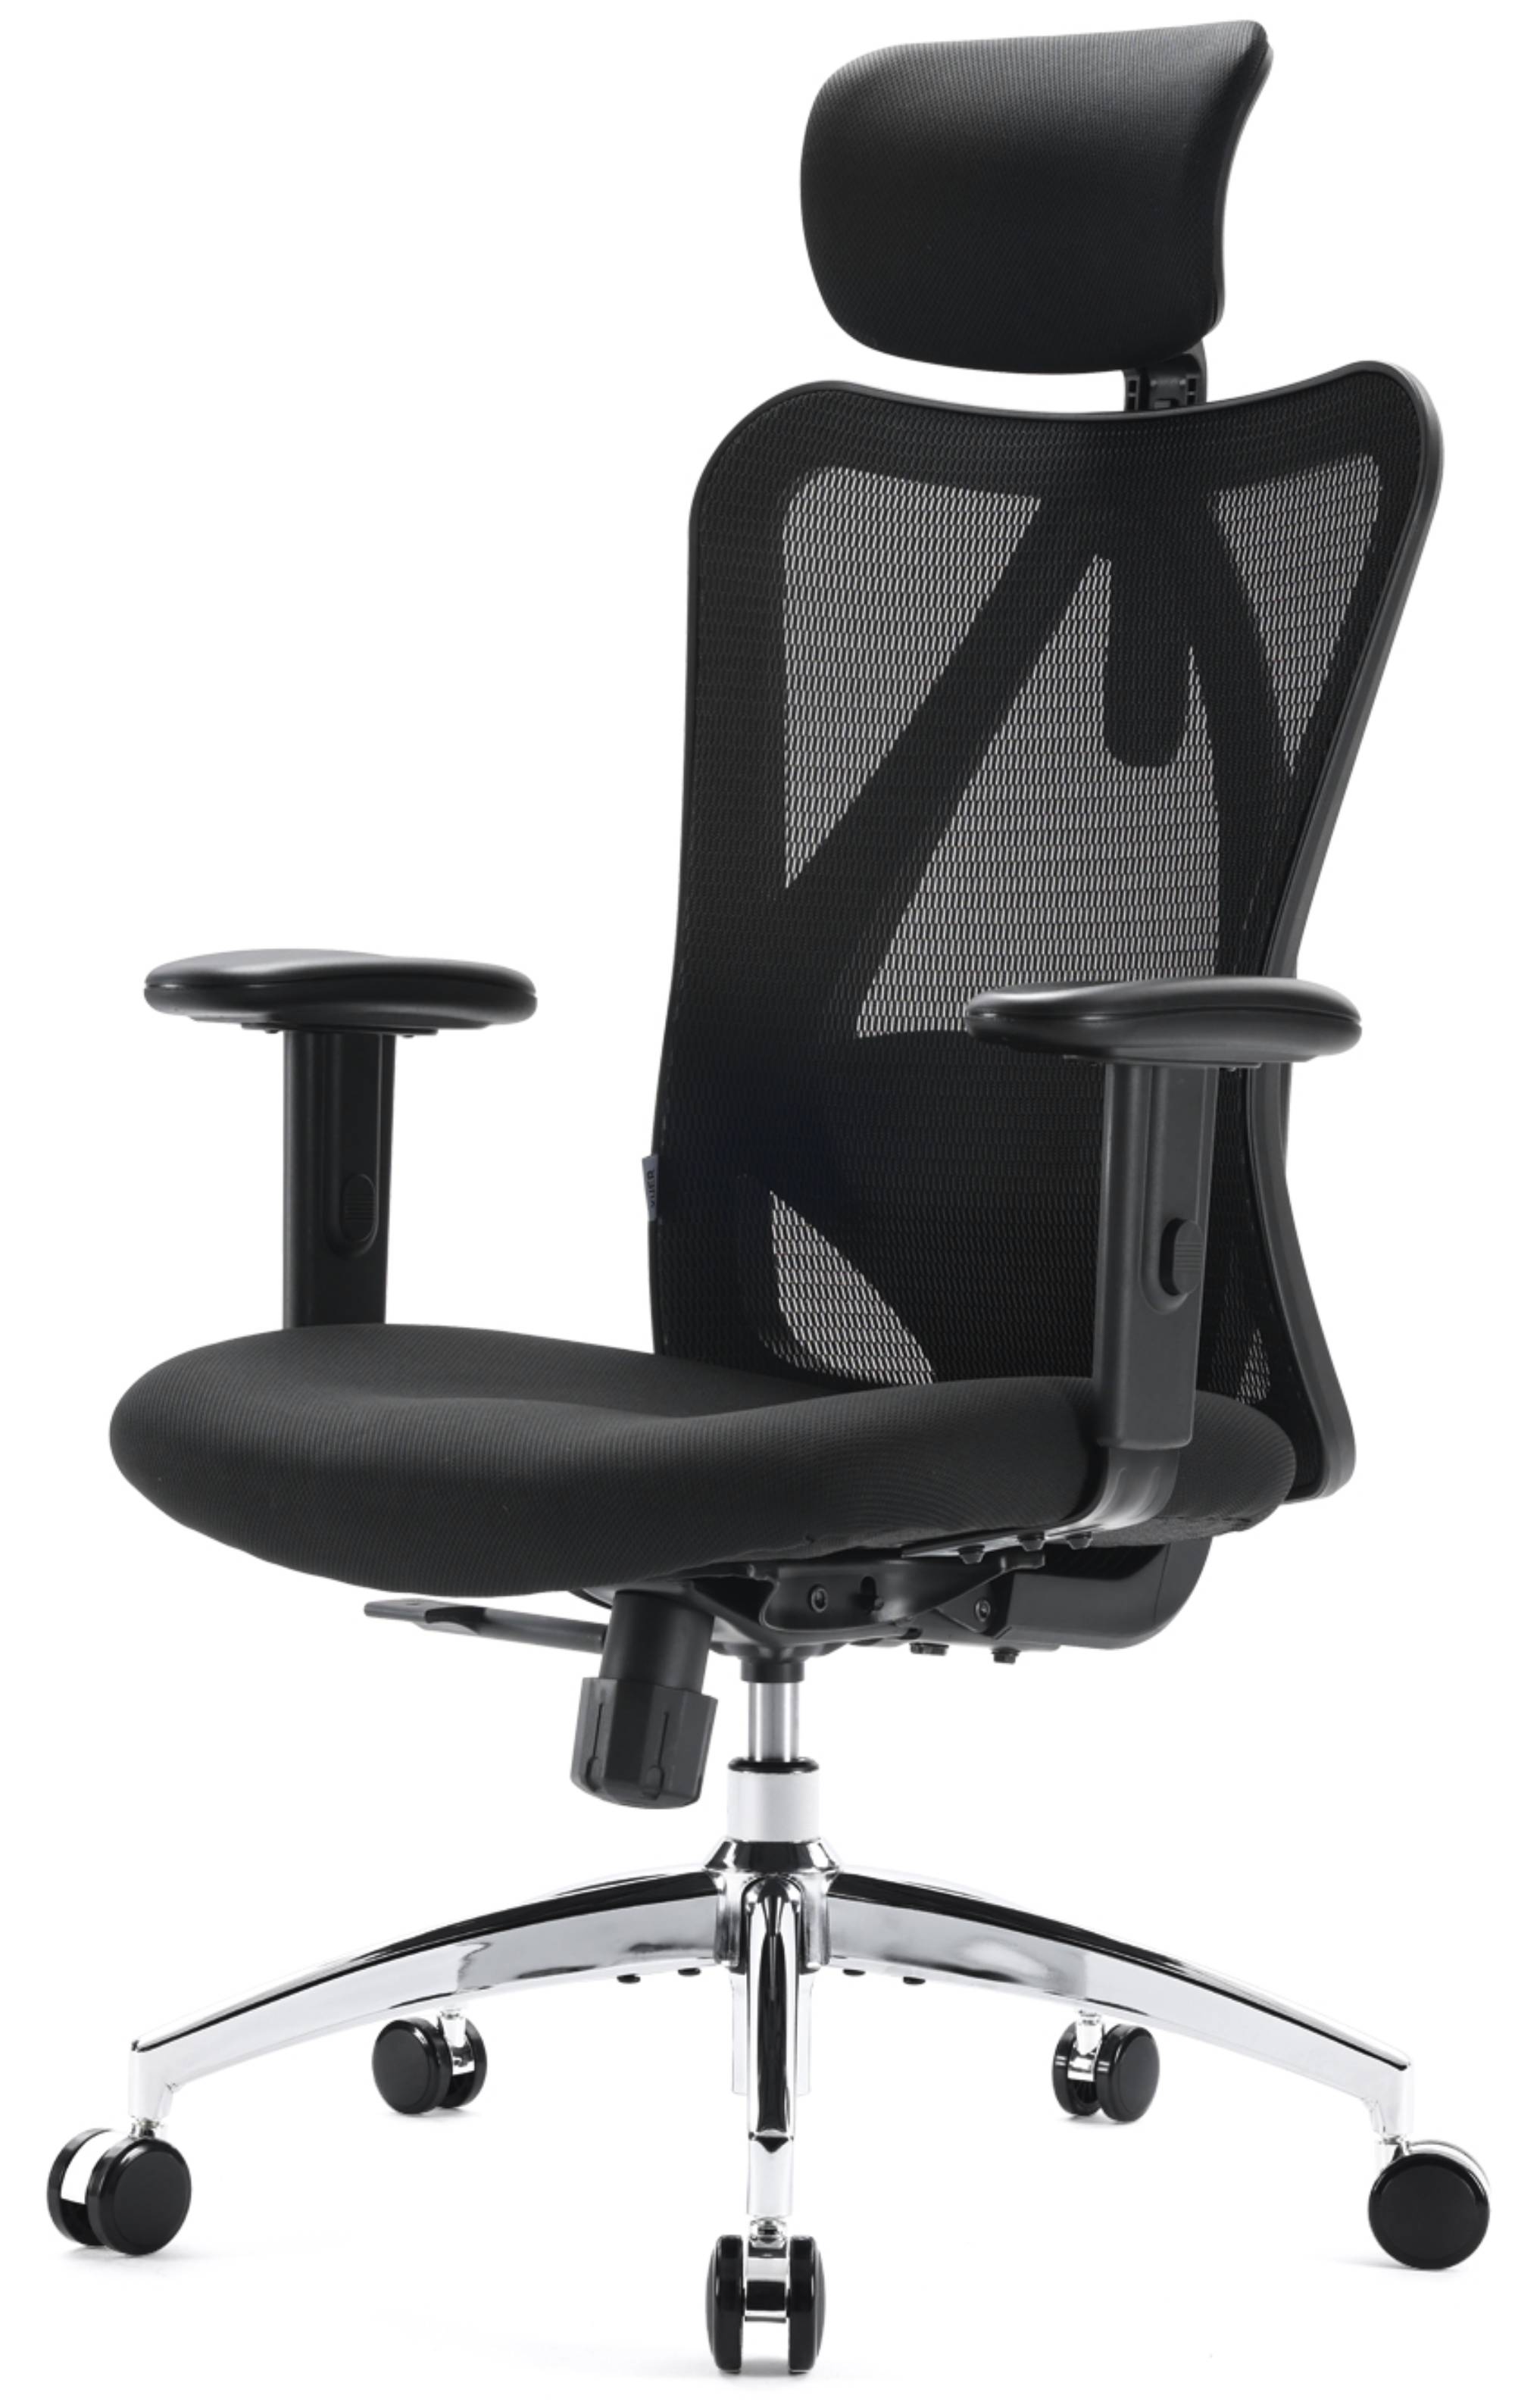 SIHOO Ergonomic Office Chair, Mesh Computer Desk Chair with Adjustable Lumbar Support, High Back chair for big and tall, Black - image 1 of 13